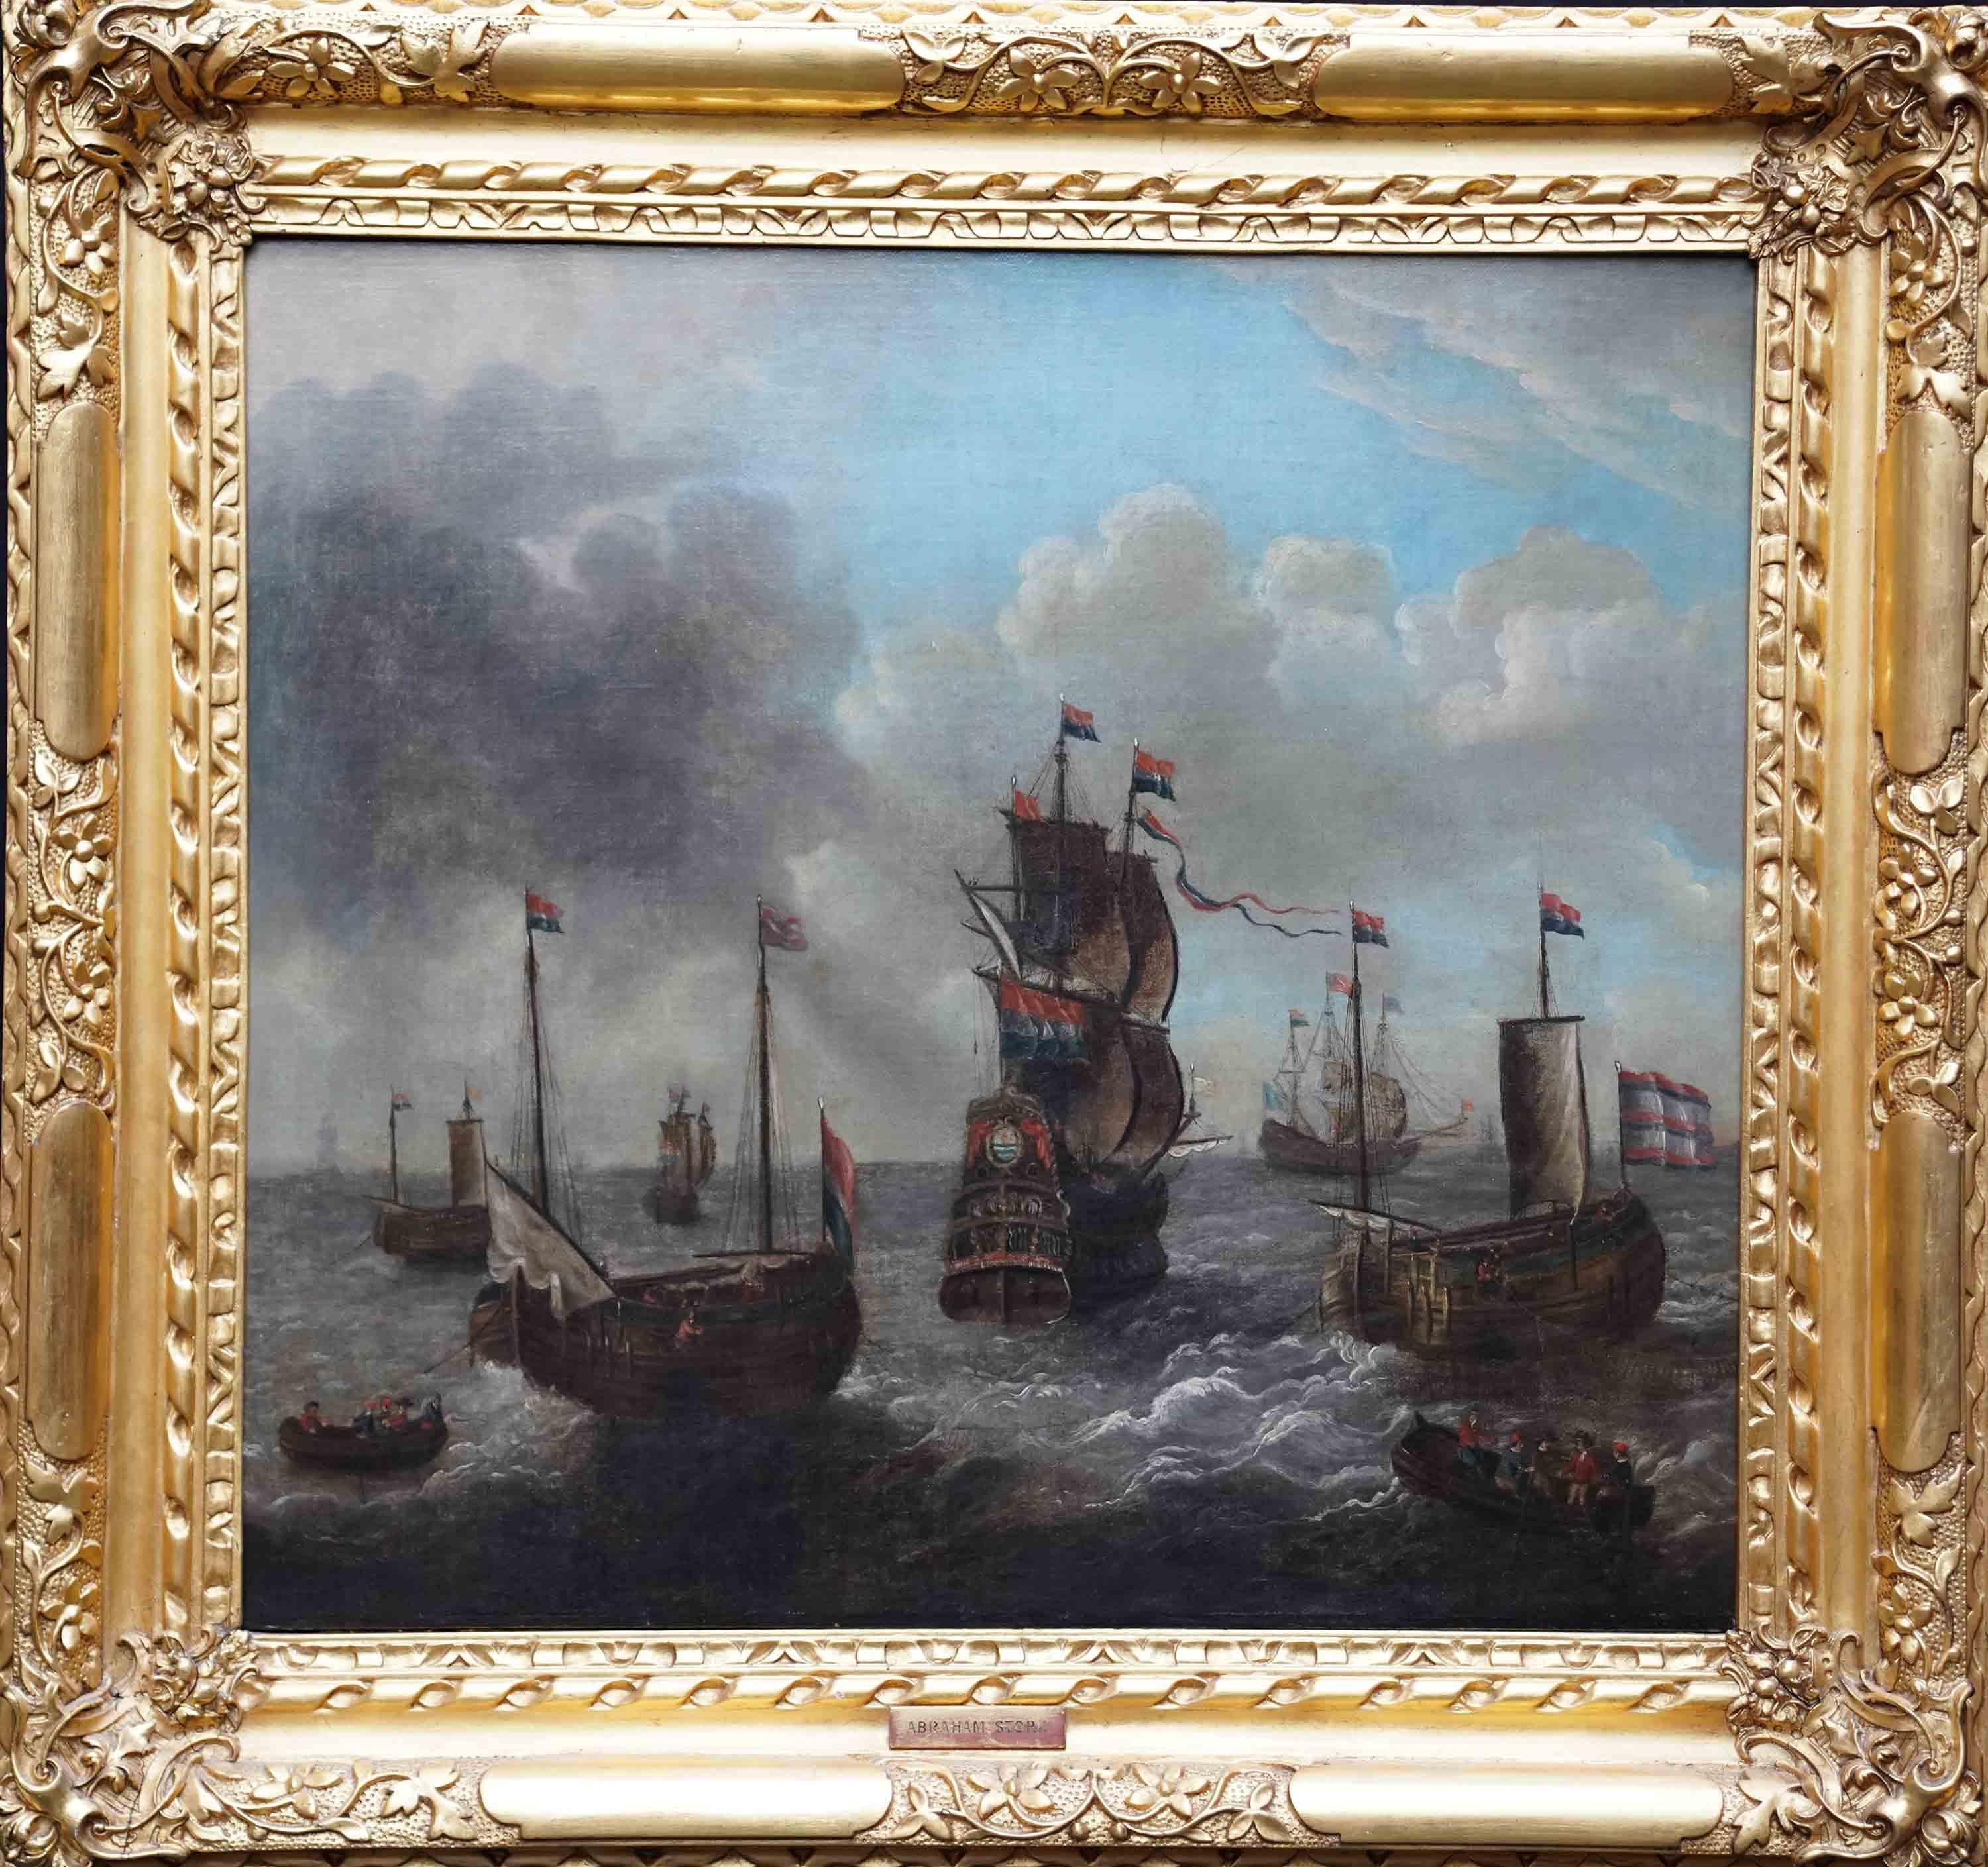 Abraham Storck Landscape Painting - Ships Heading to Sea - Dutch 17th century Old Master marine art oil painting